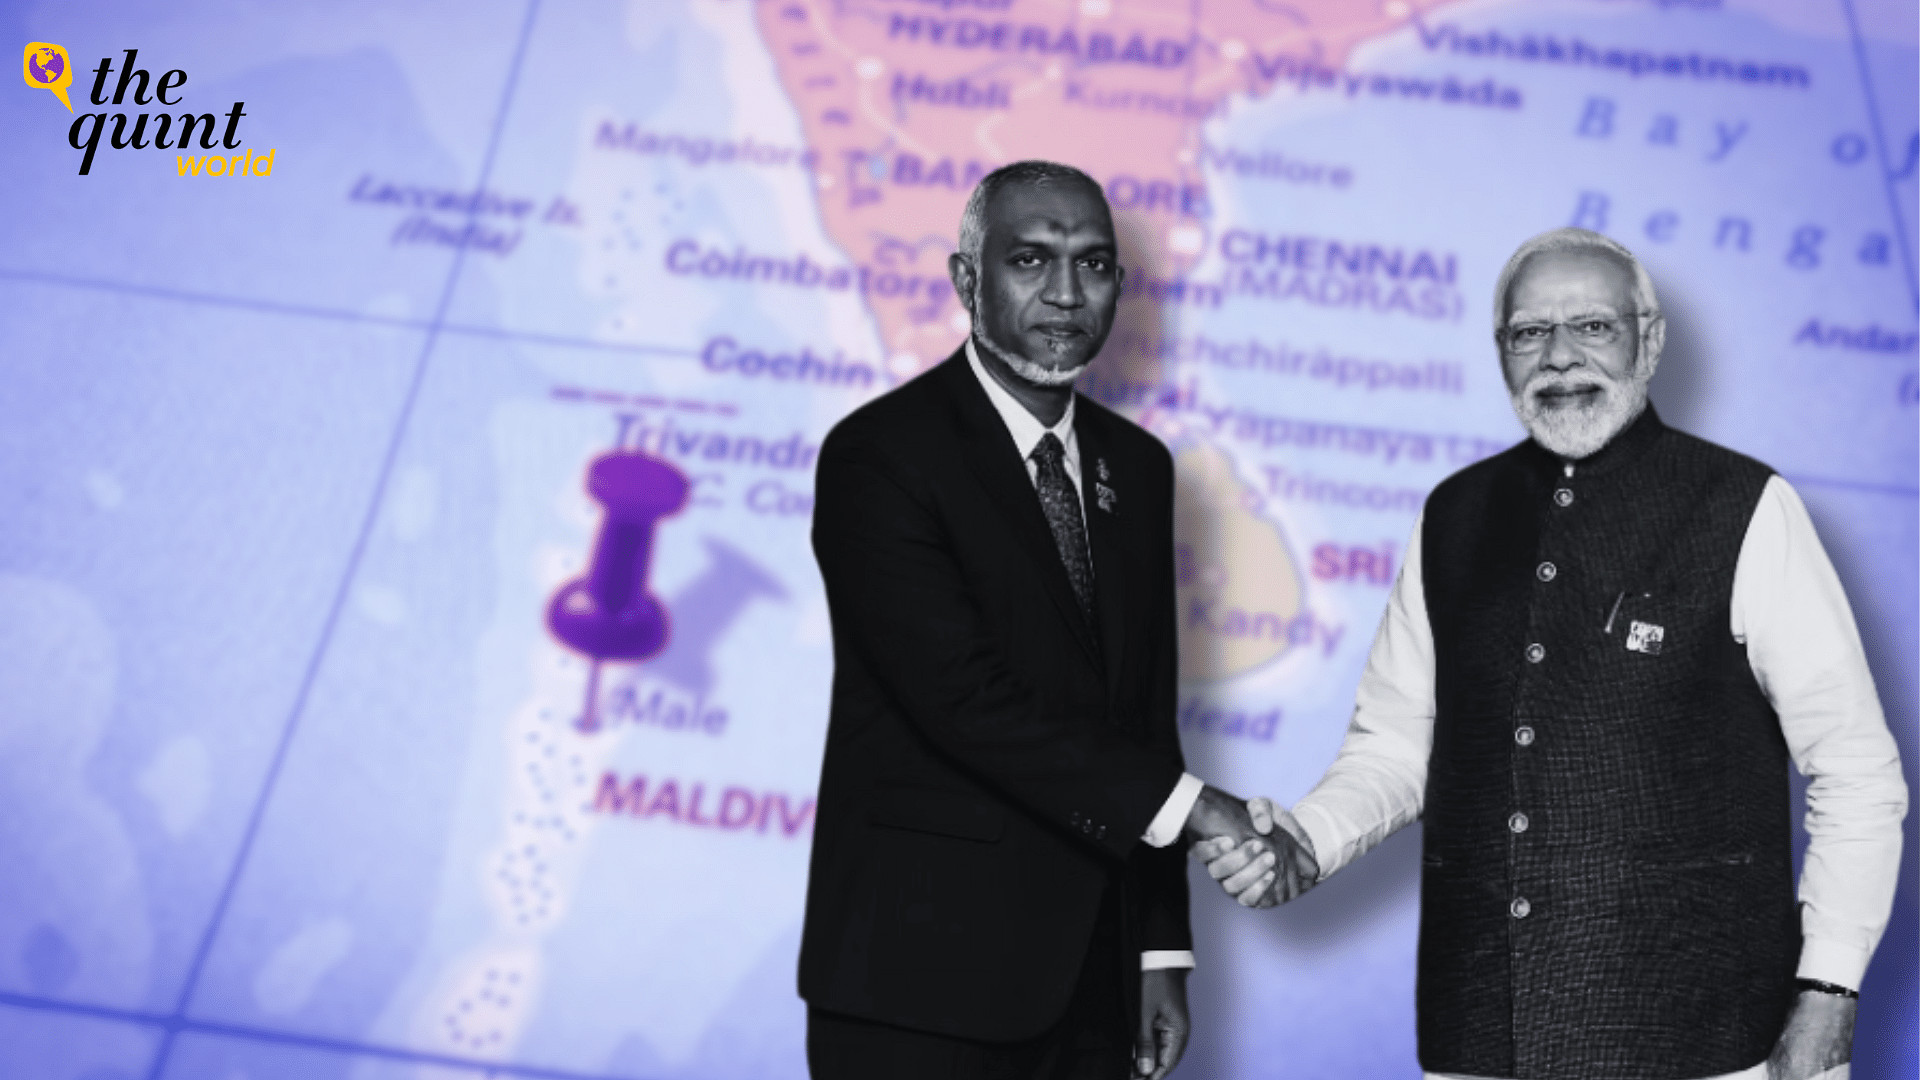 Maldives Election: Muizzu's Win, 'India Out' & What it Means for Bilateral Ties